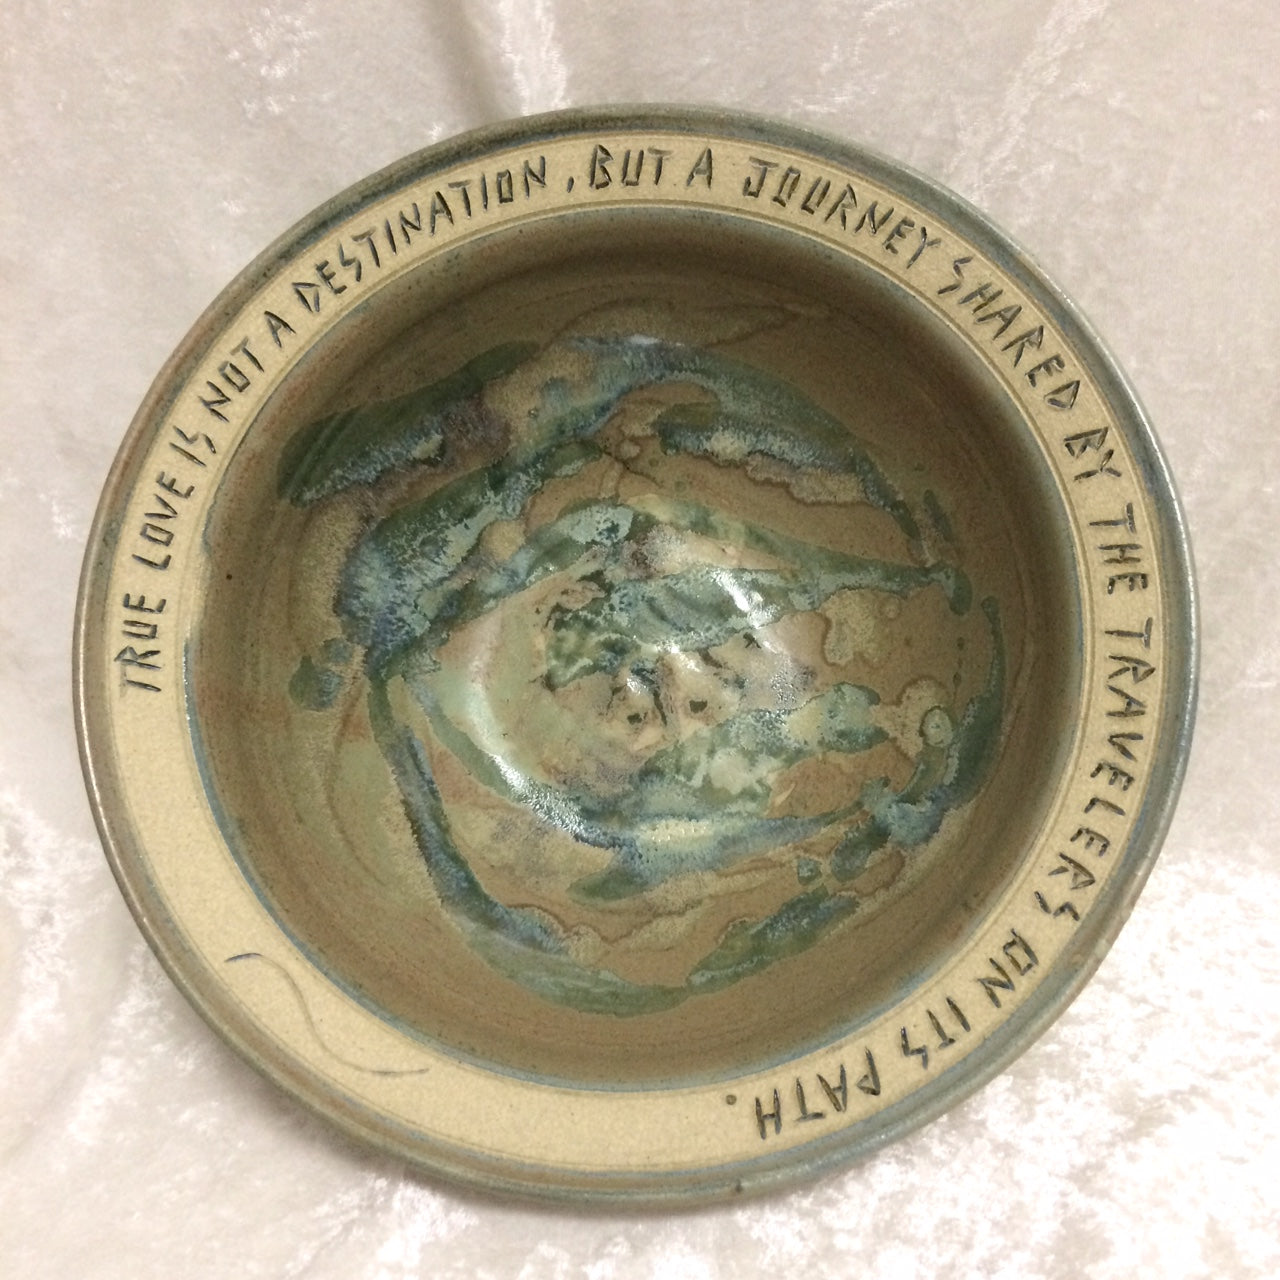 Blessing Bowl - "True Love Is Not A Destination"